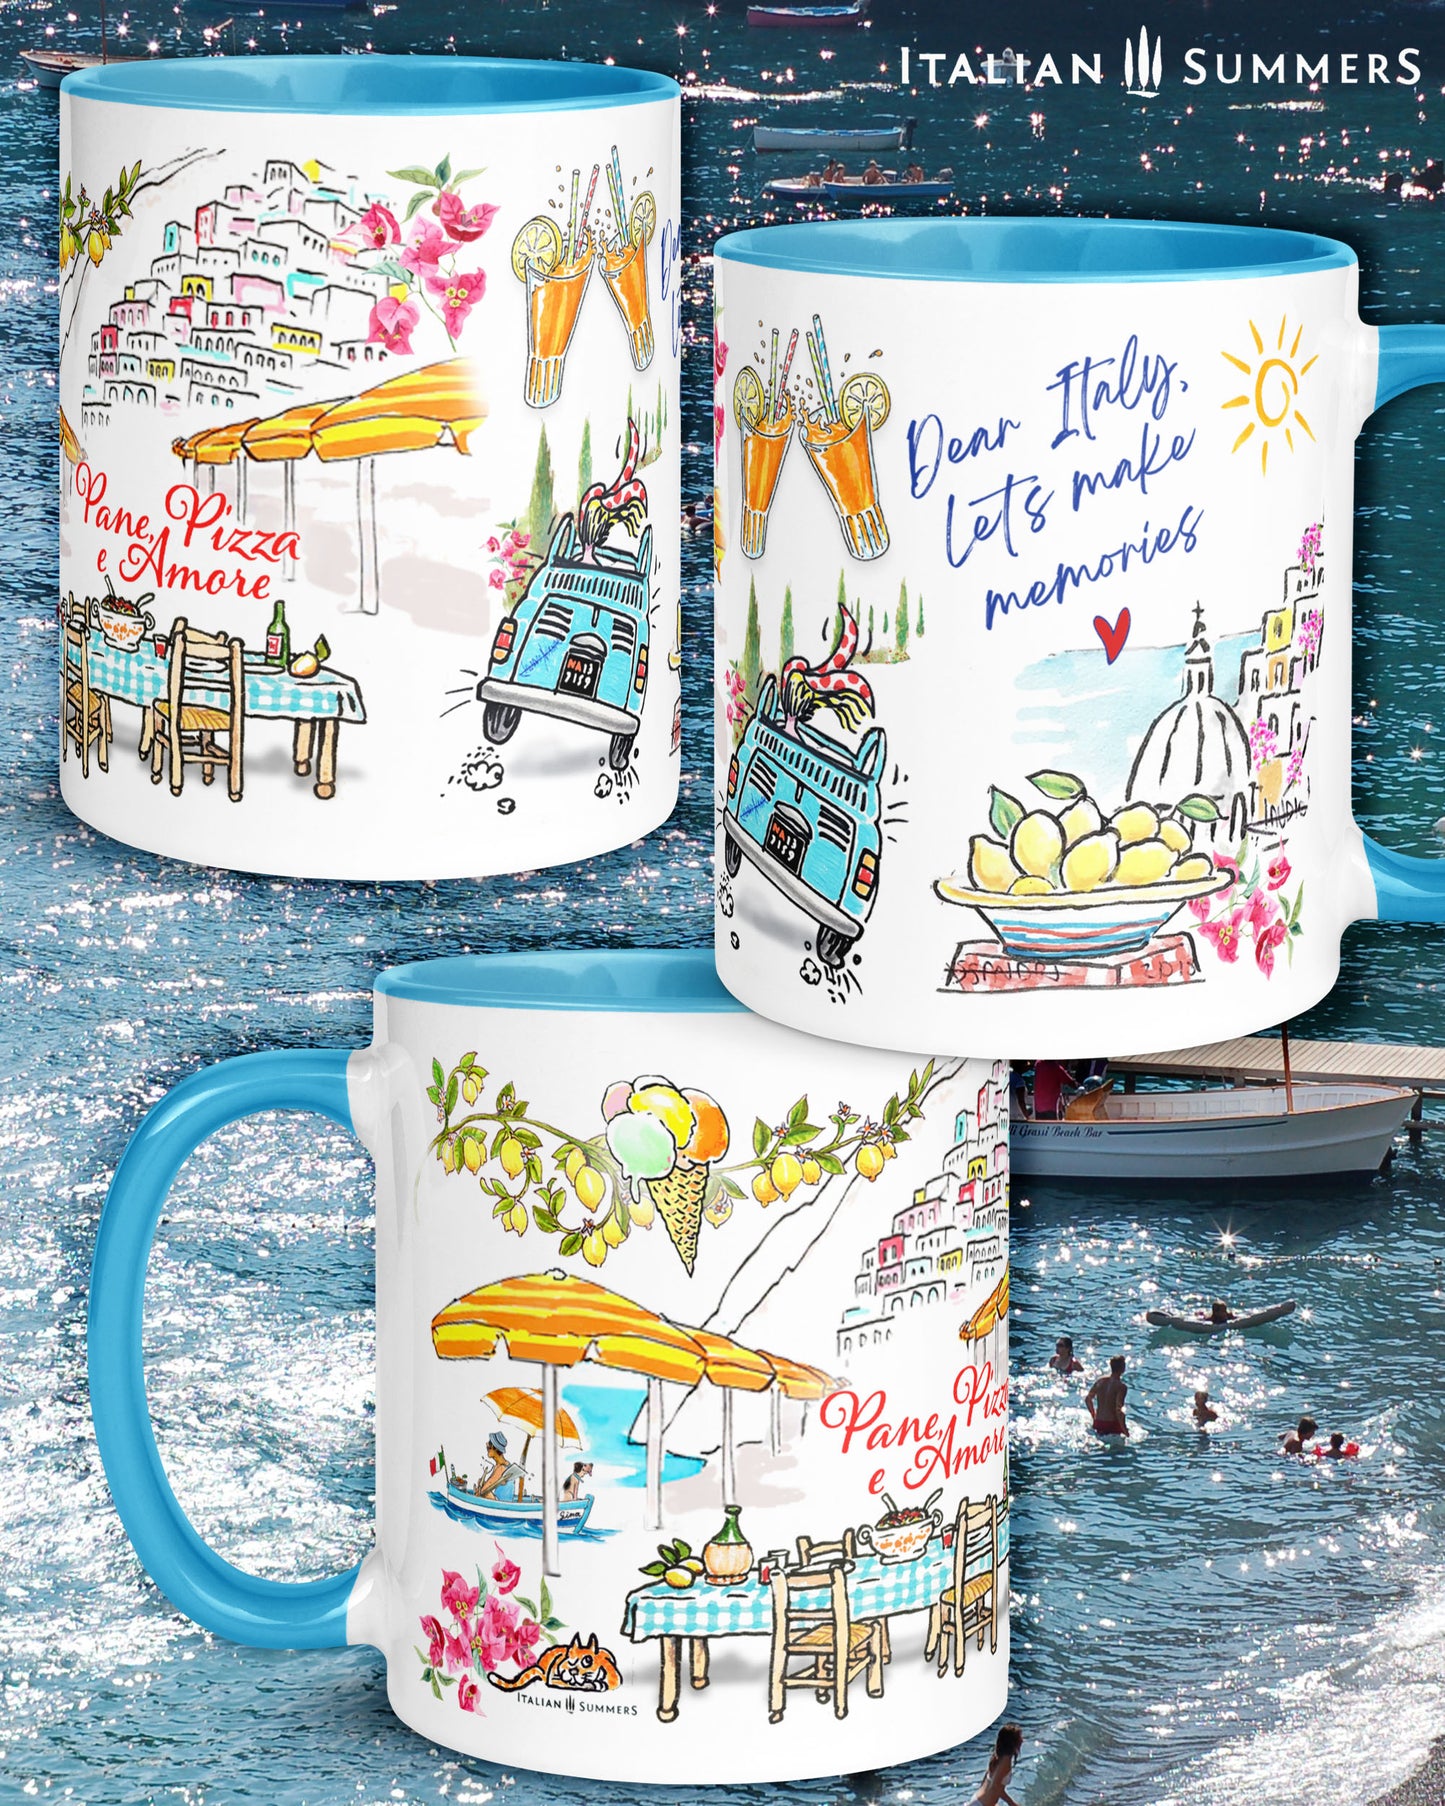 A made to order mug decorated with a print of colorful beach umbrellas on the Amalfi coast, two glasses with a red drink and straws clinking together, and a colorful sketch of Positano in the backround. A texts states: See you in the Piazza